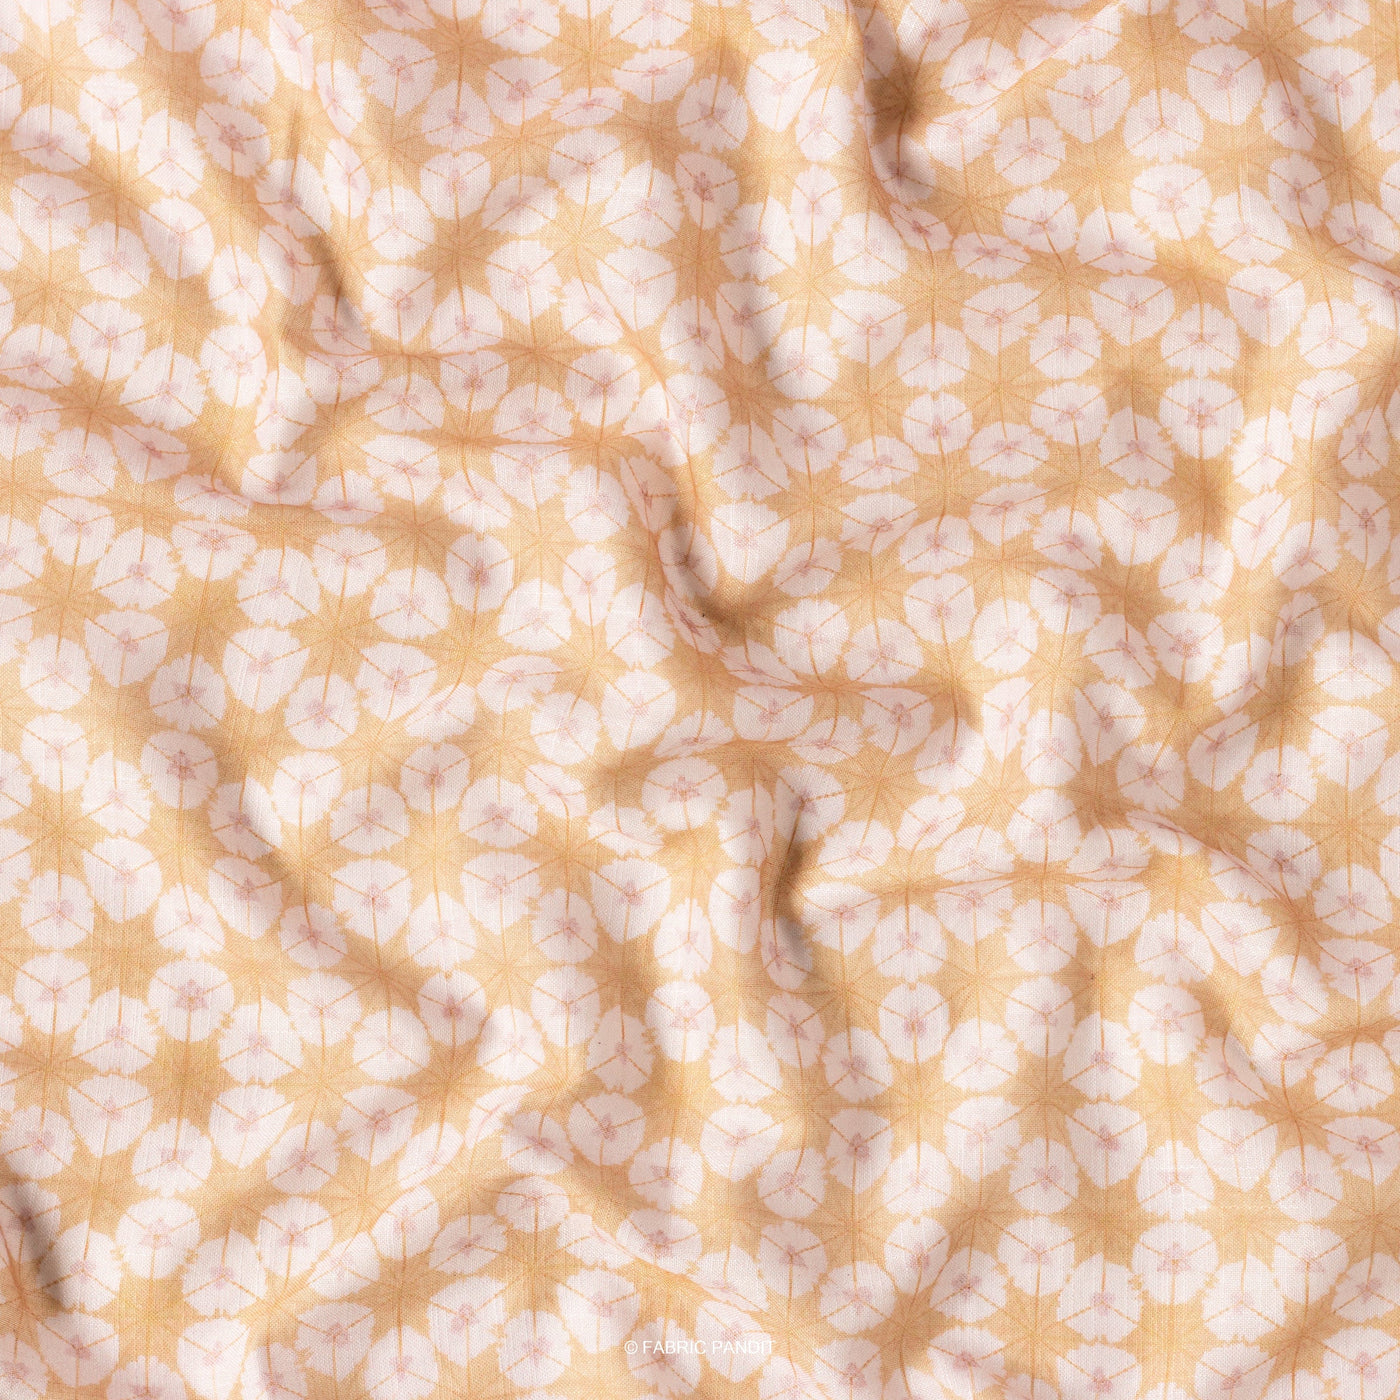 Fabric Pandit Fabric Yellow Orange And White Abstract Pattern Digital Printed Poly Linen Blend Slub Fabric (Width 44 Inches)